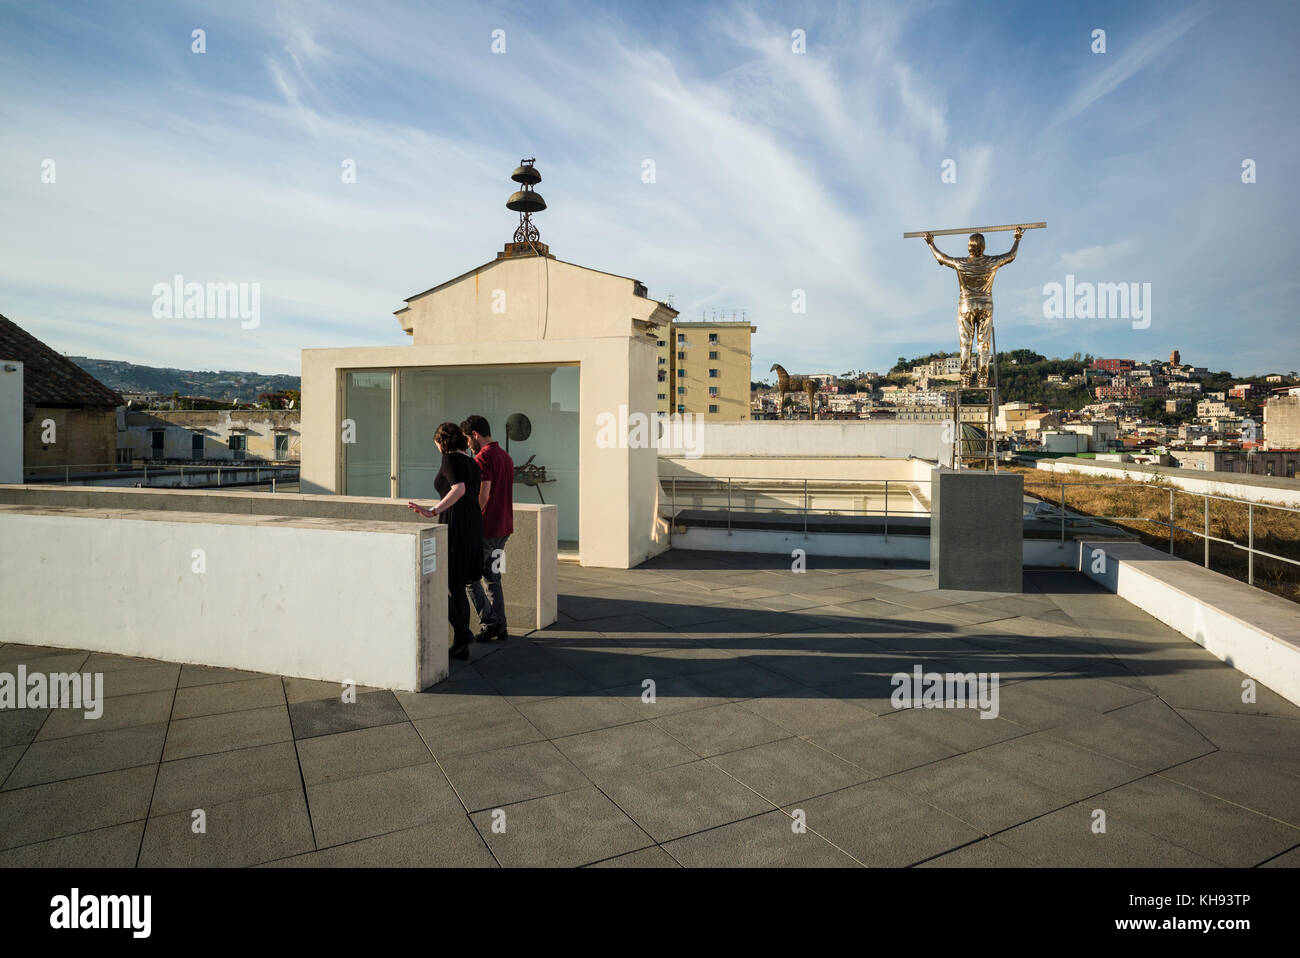 Naples. Italy. MADRE Museo d'Arte Contemporanea Donnaregina, contemporary art museum, roof terrace with the sculpture The Man Measuring the Clouds, by Stock Photo